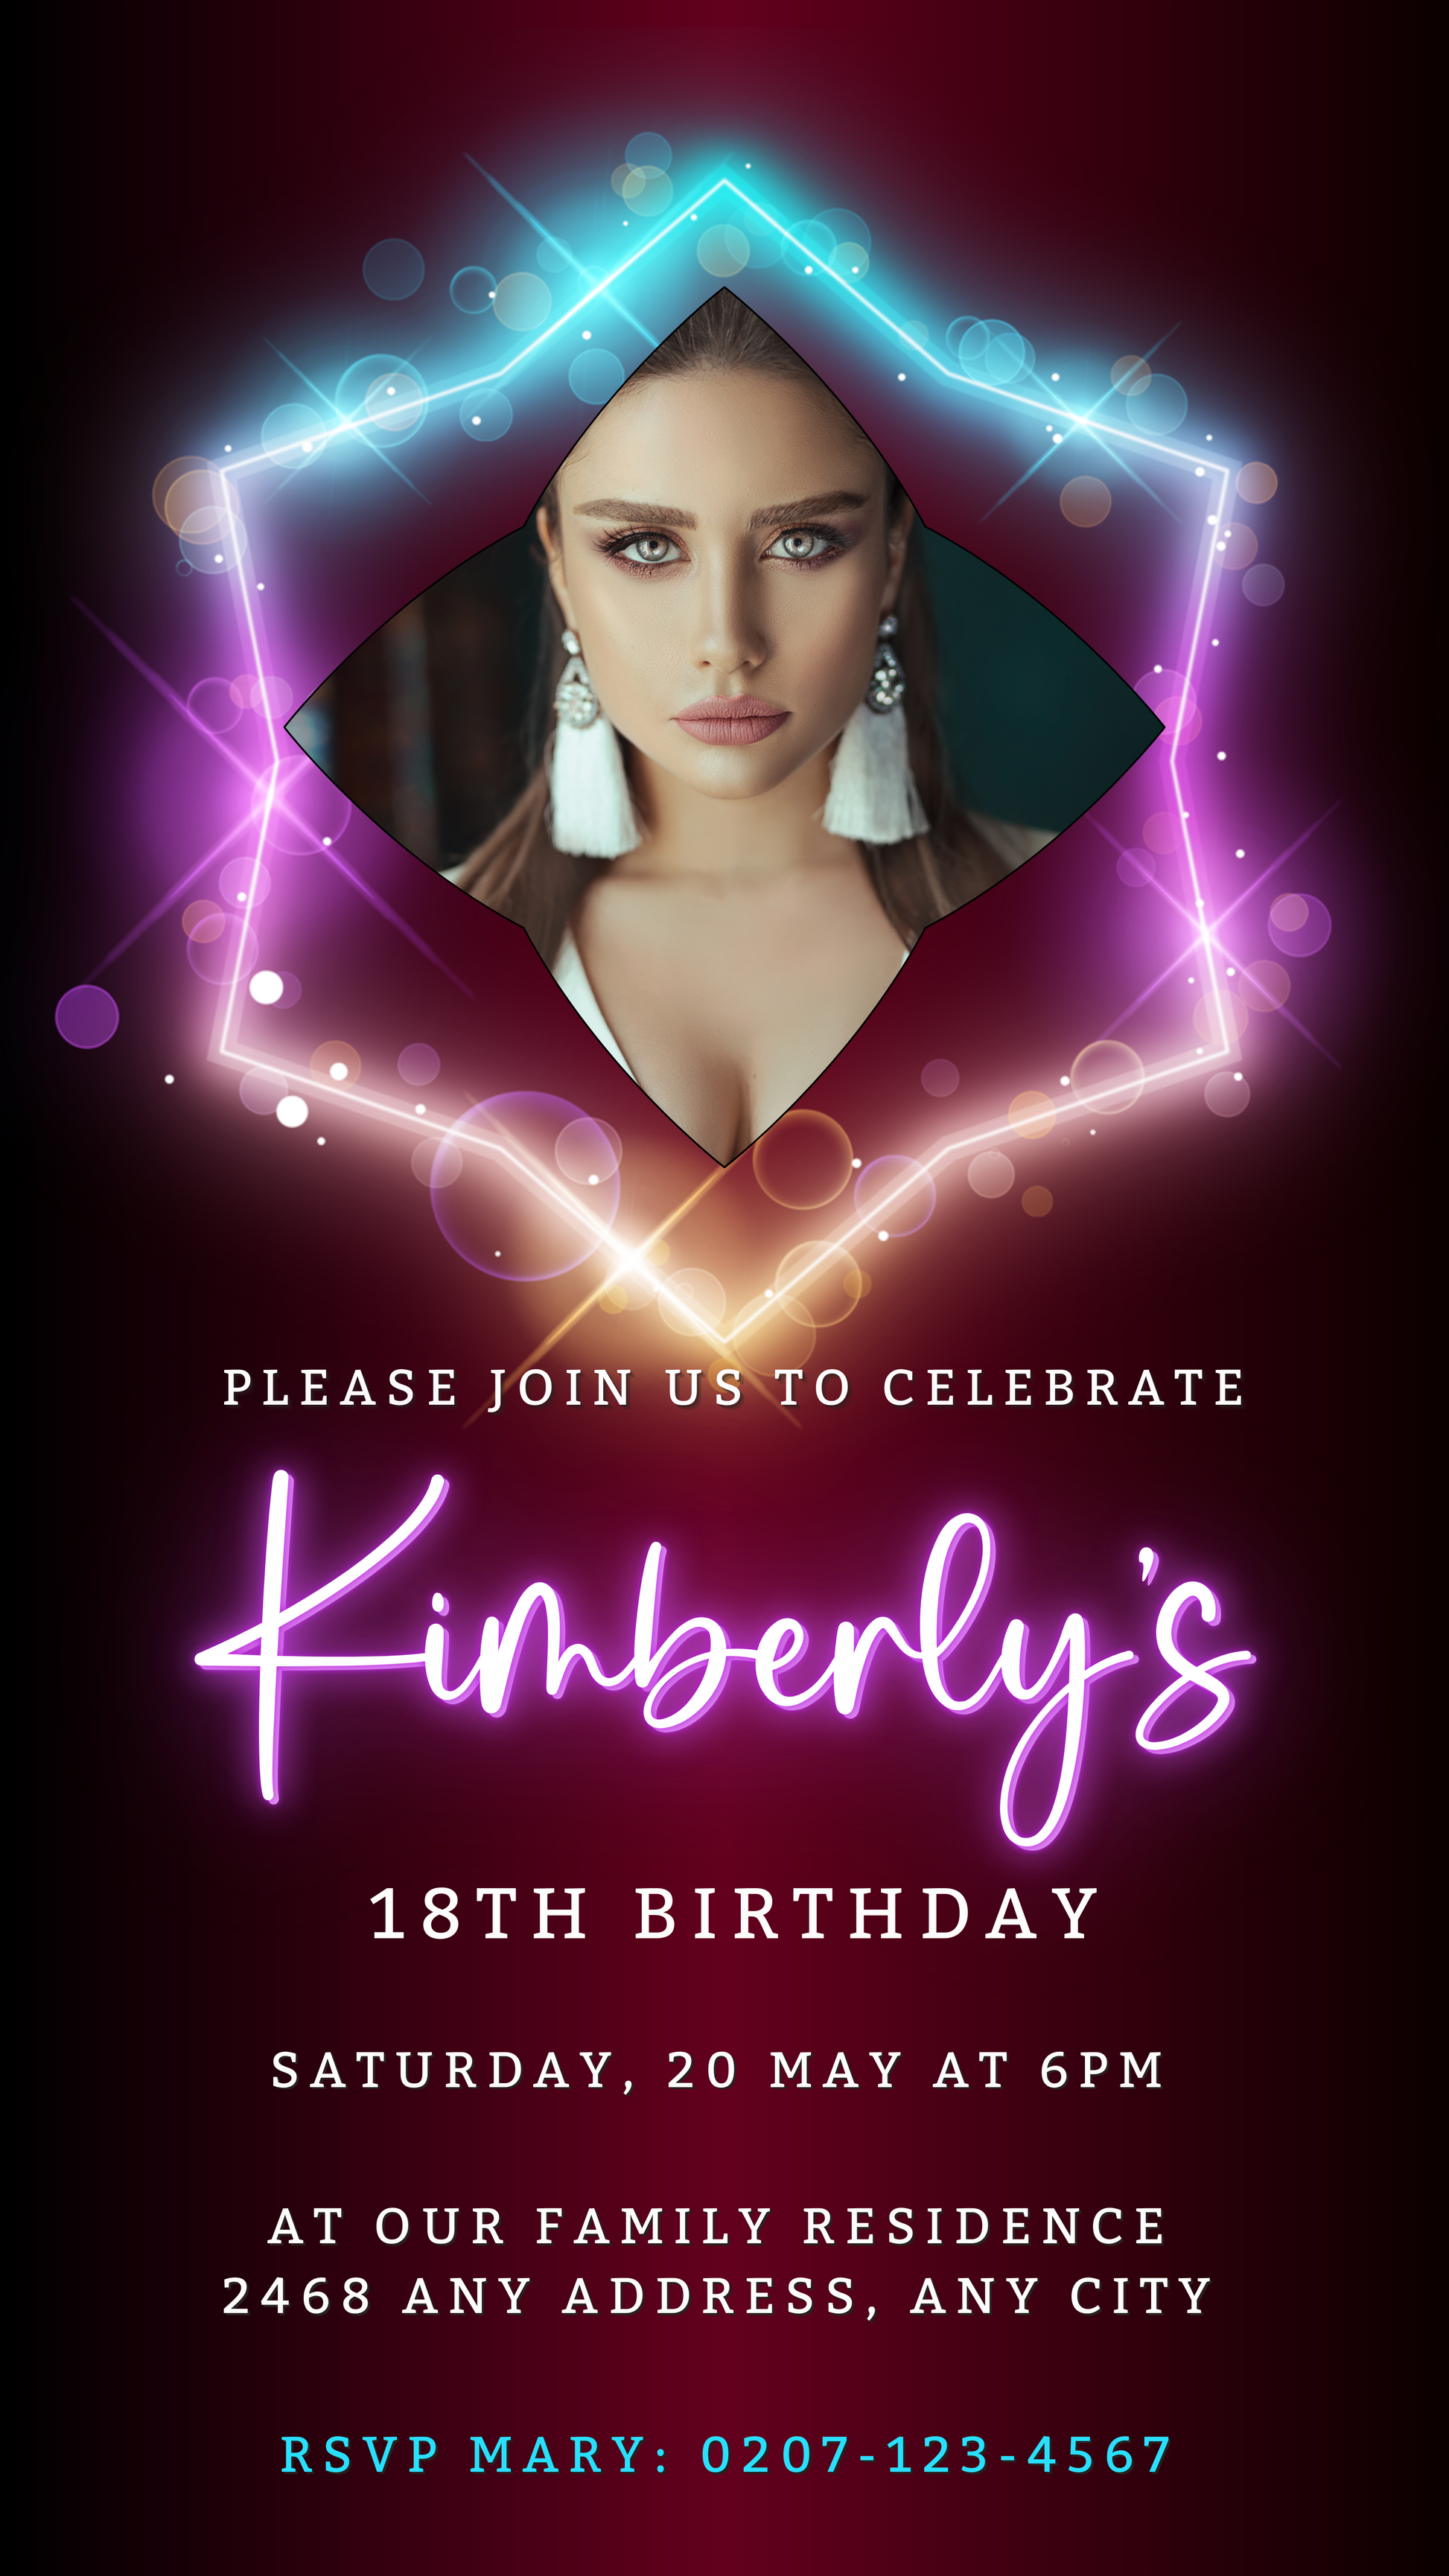 Customizable digital birthday party evite featuring a woman's face in a diamond-shaped frame with editable text using Canva.